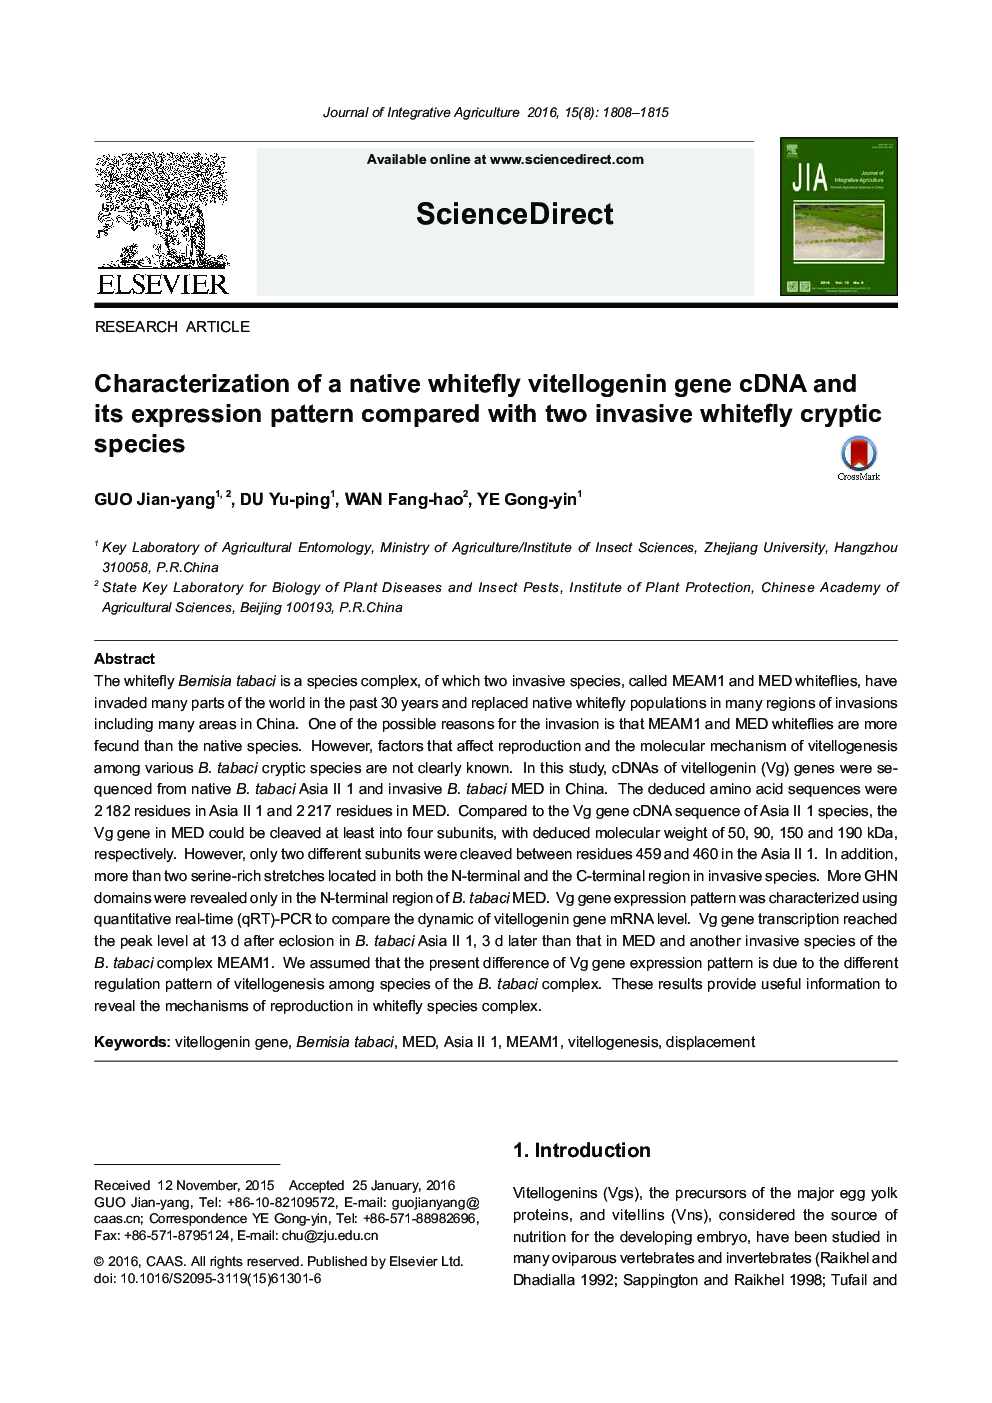 Characterization of a native whitefly vitellogenin gene cDNA and its expression pattern compared with two invasive whitefly cryptic species